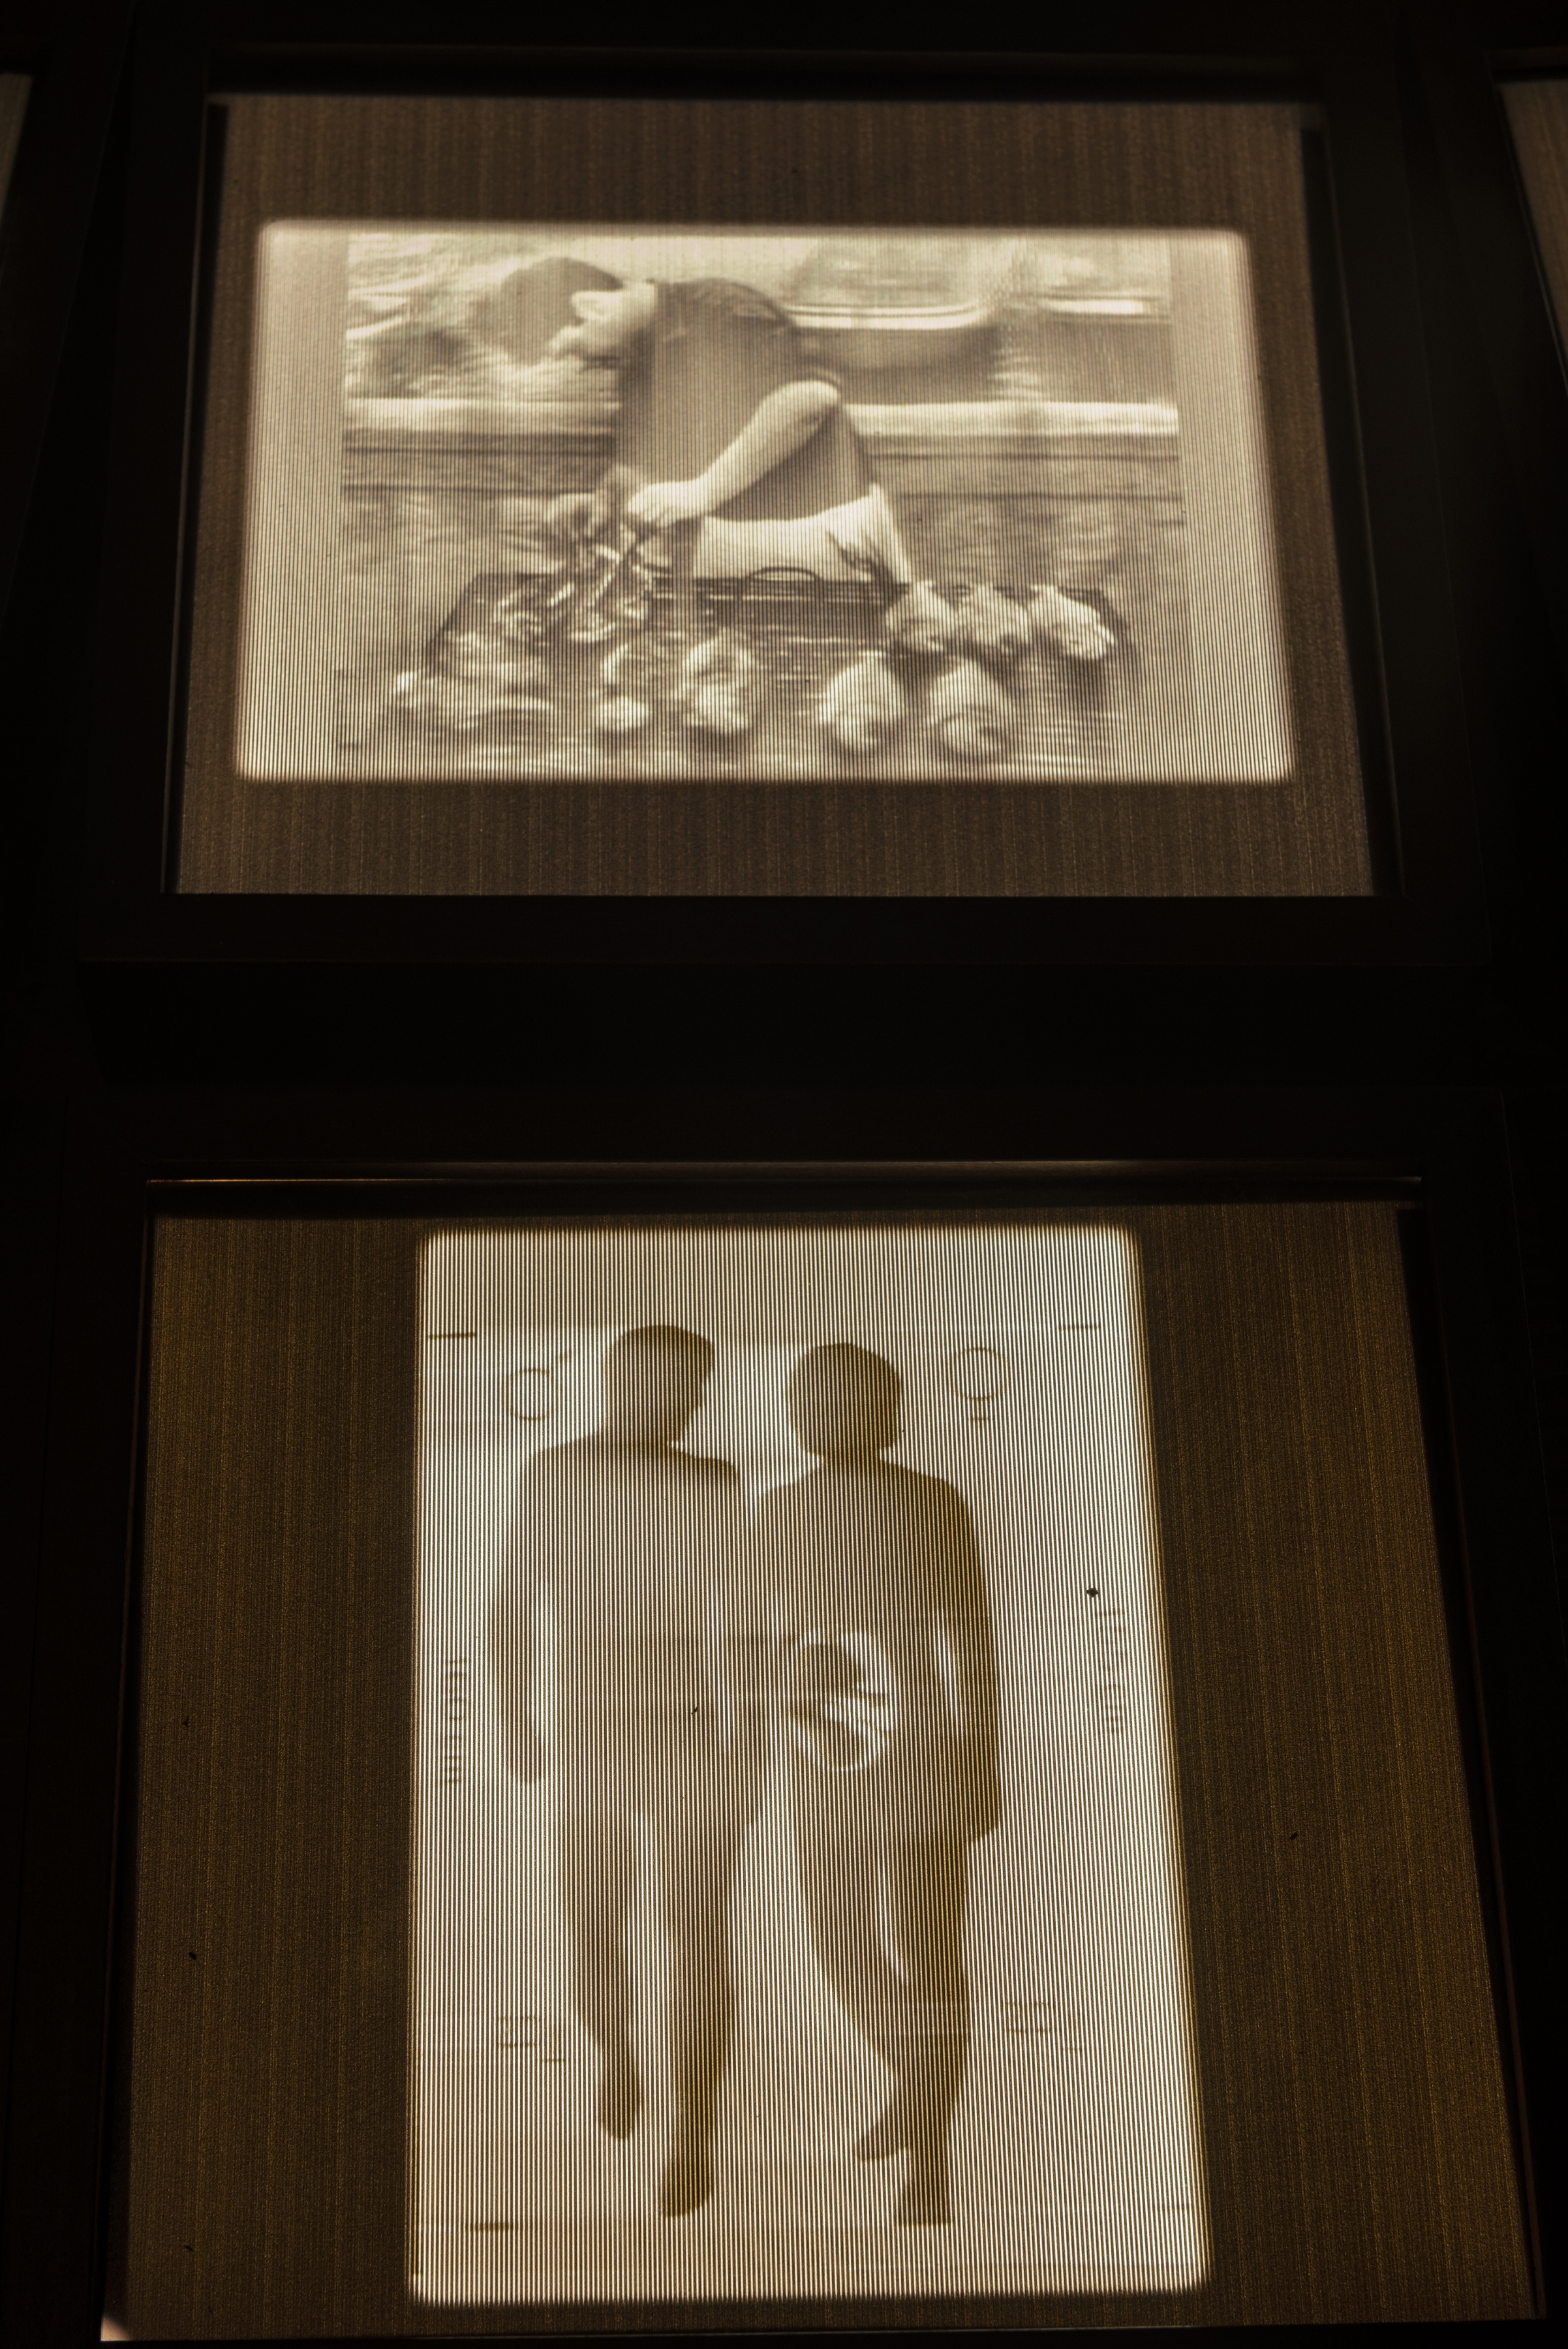 Close up photo of 3D transparencies of images from the Golden Record. On top, there is san image of a man barbecuing, and on the bottom there is a graphic with a man and woman and her reproductive organs.